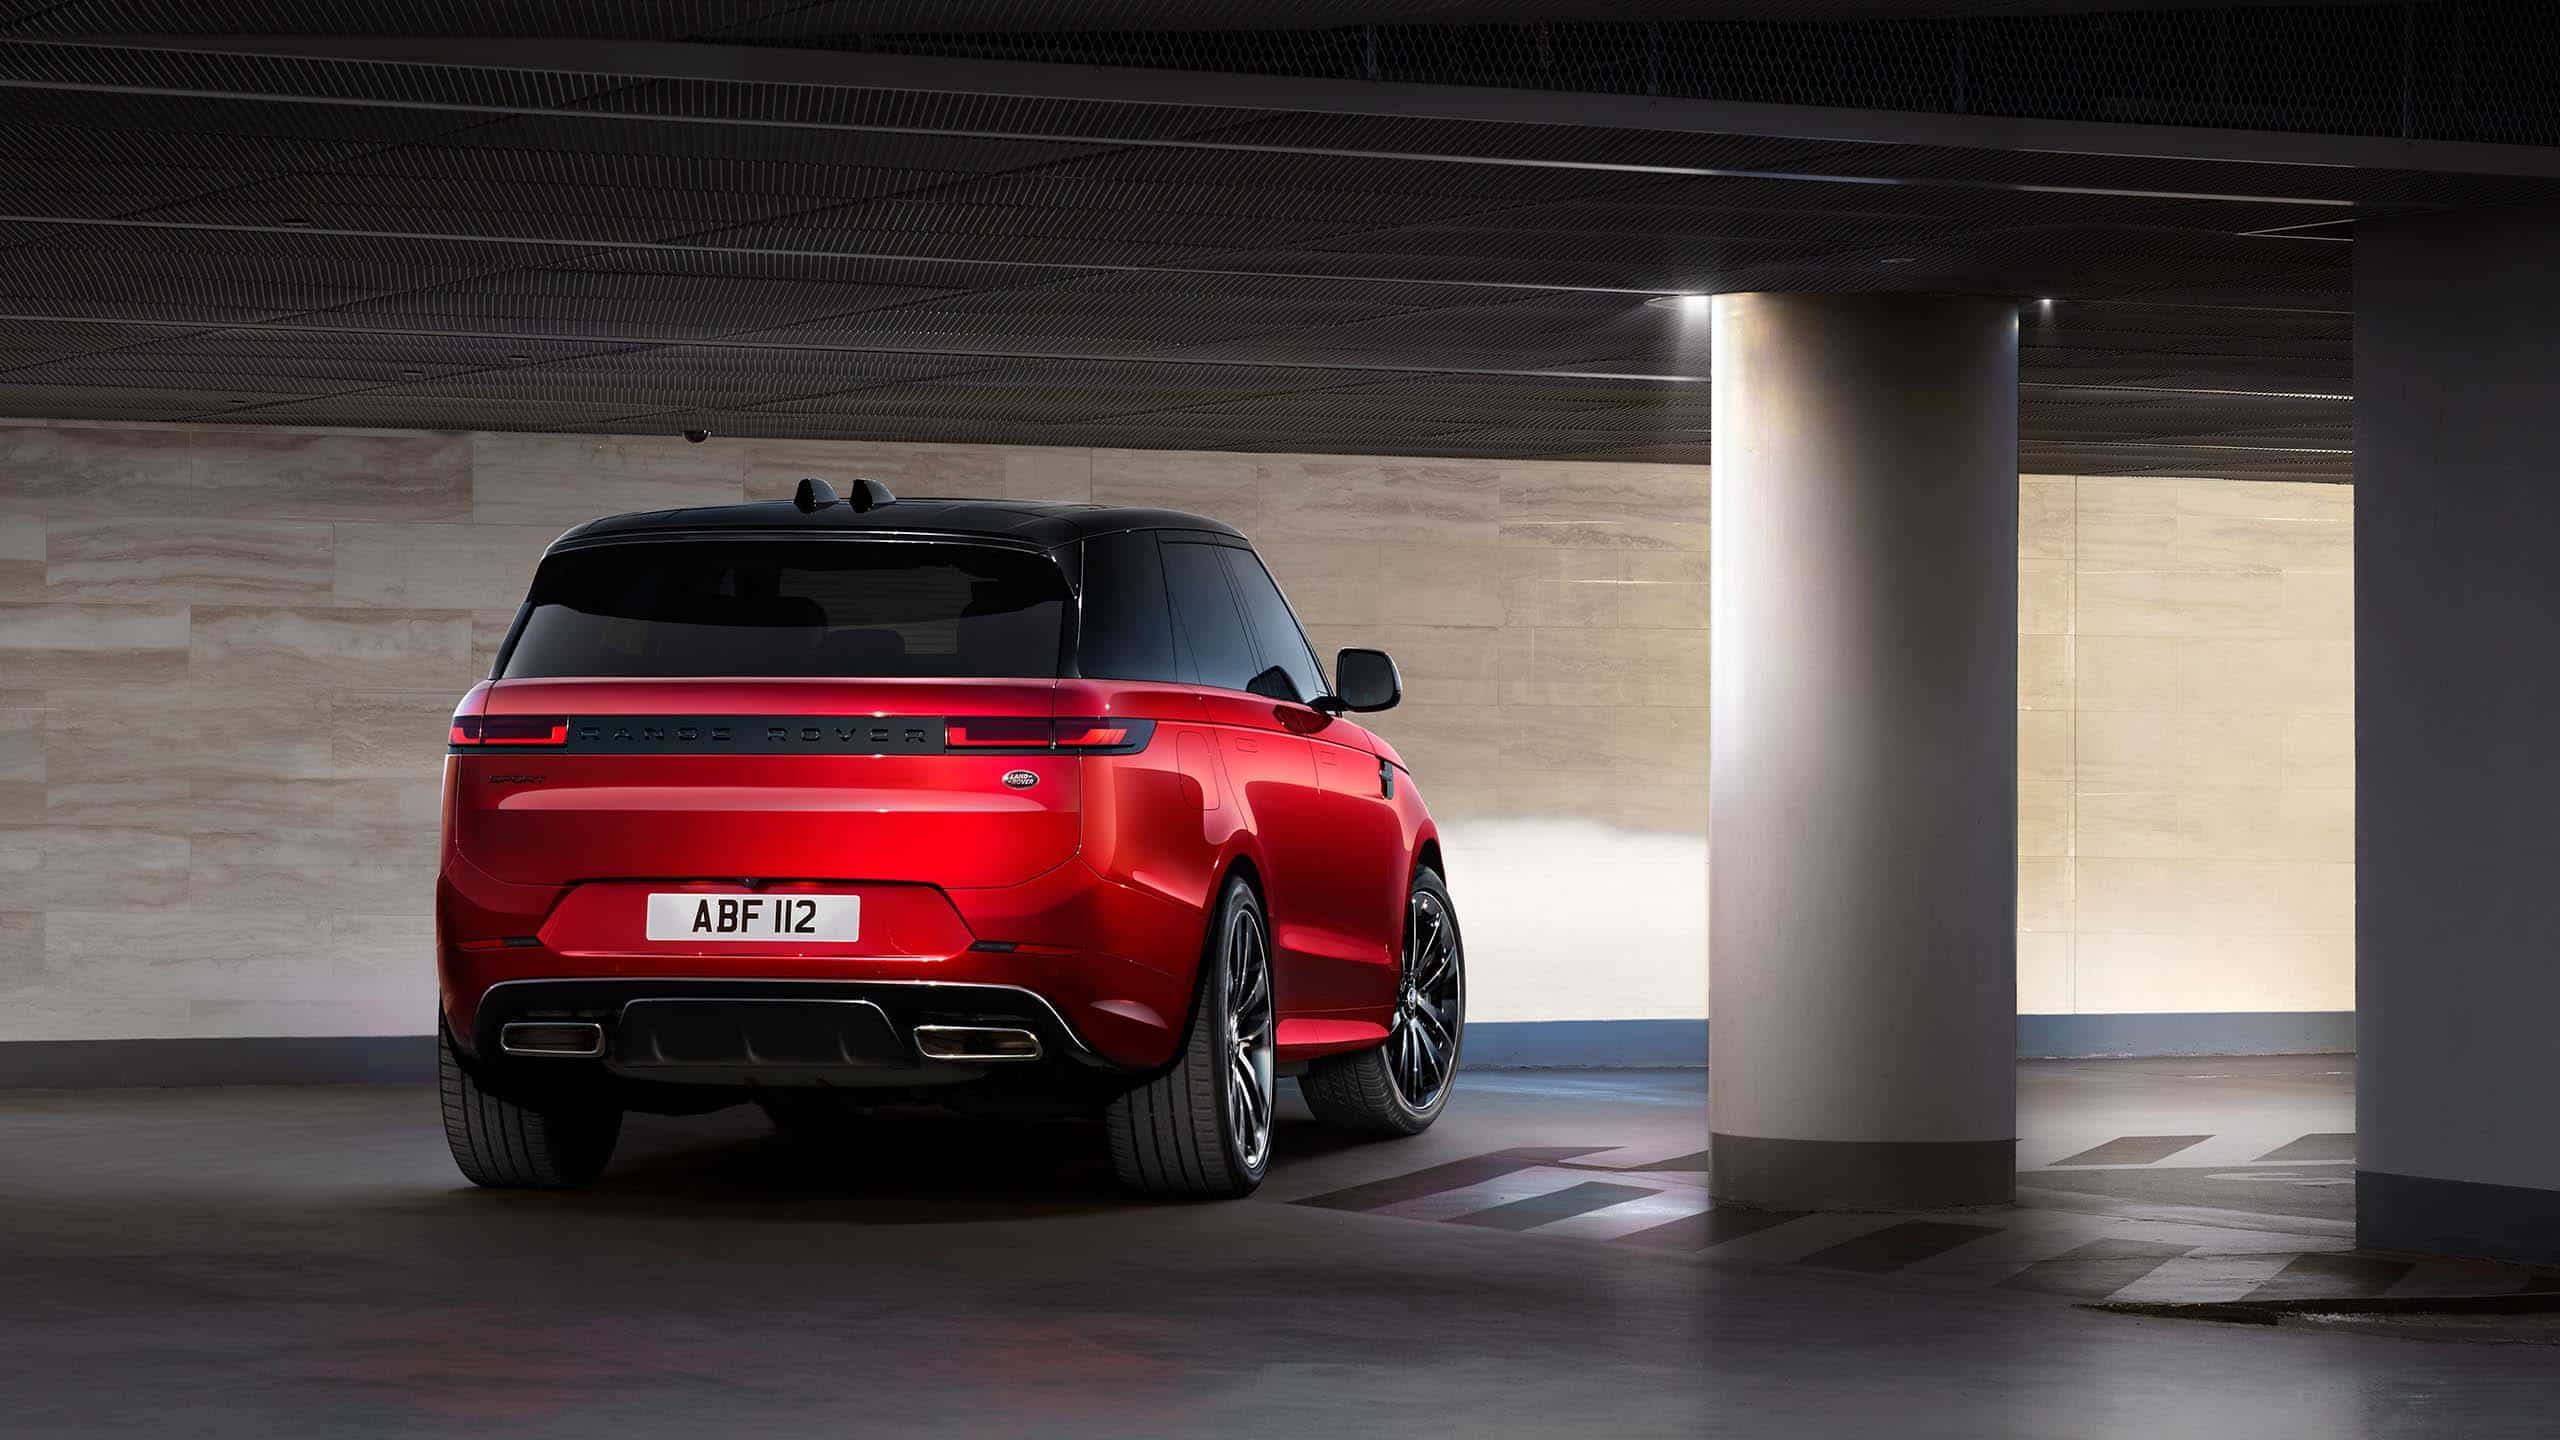 A view of the Range Rover Sport from the rear